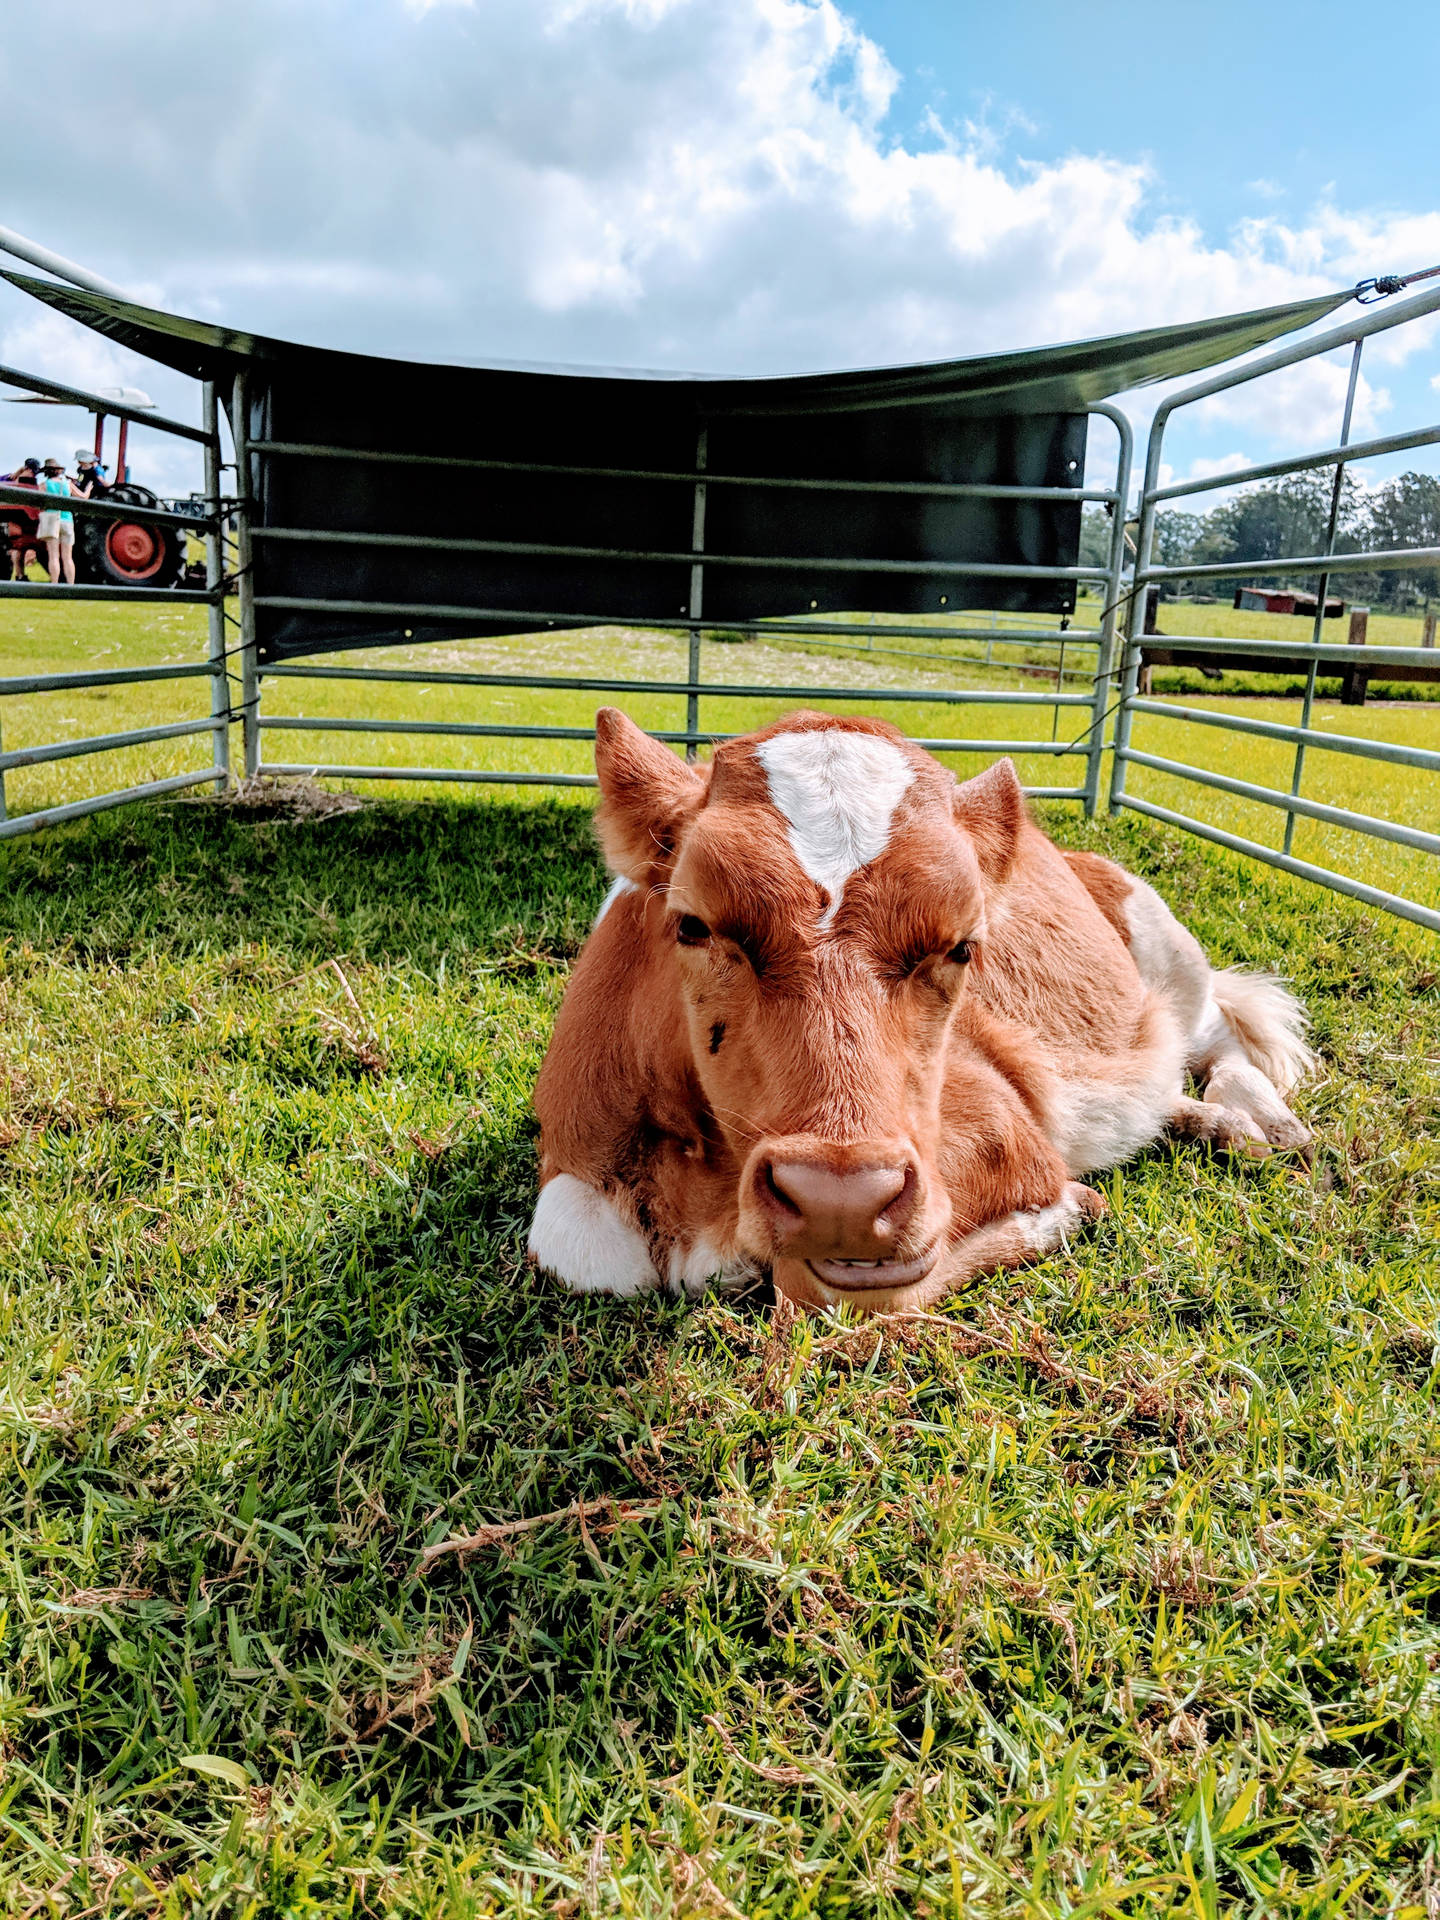 Cute Cow In Corral Background